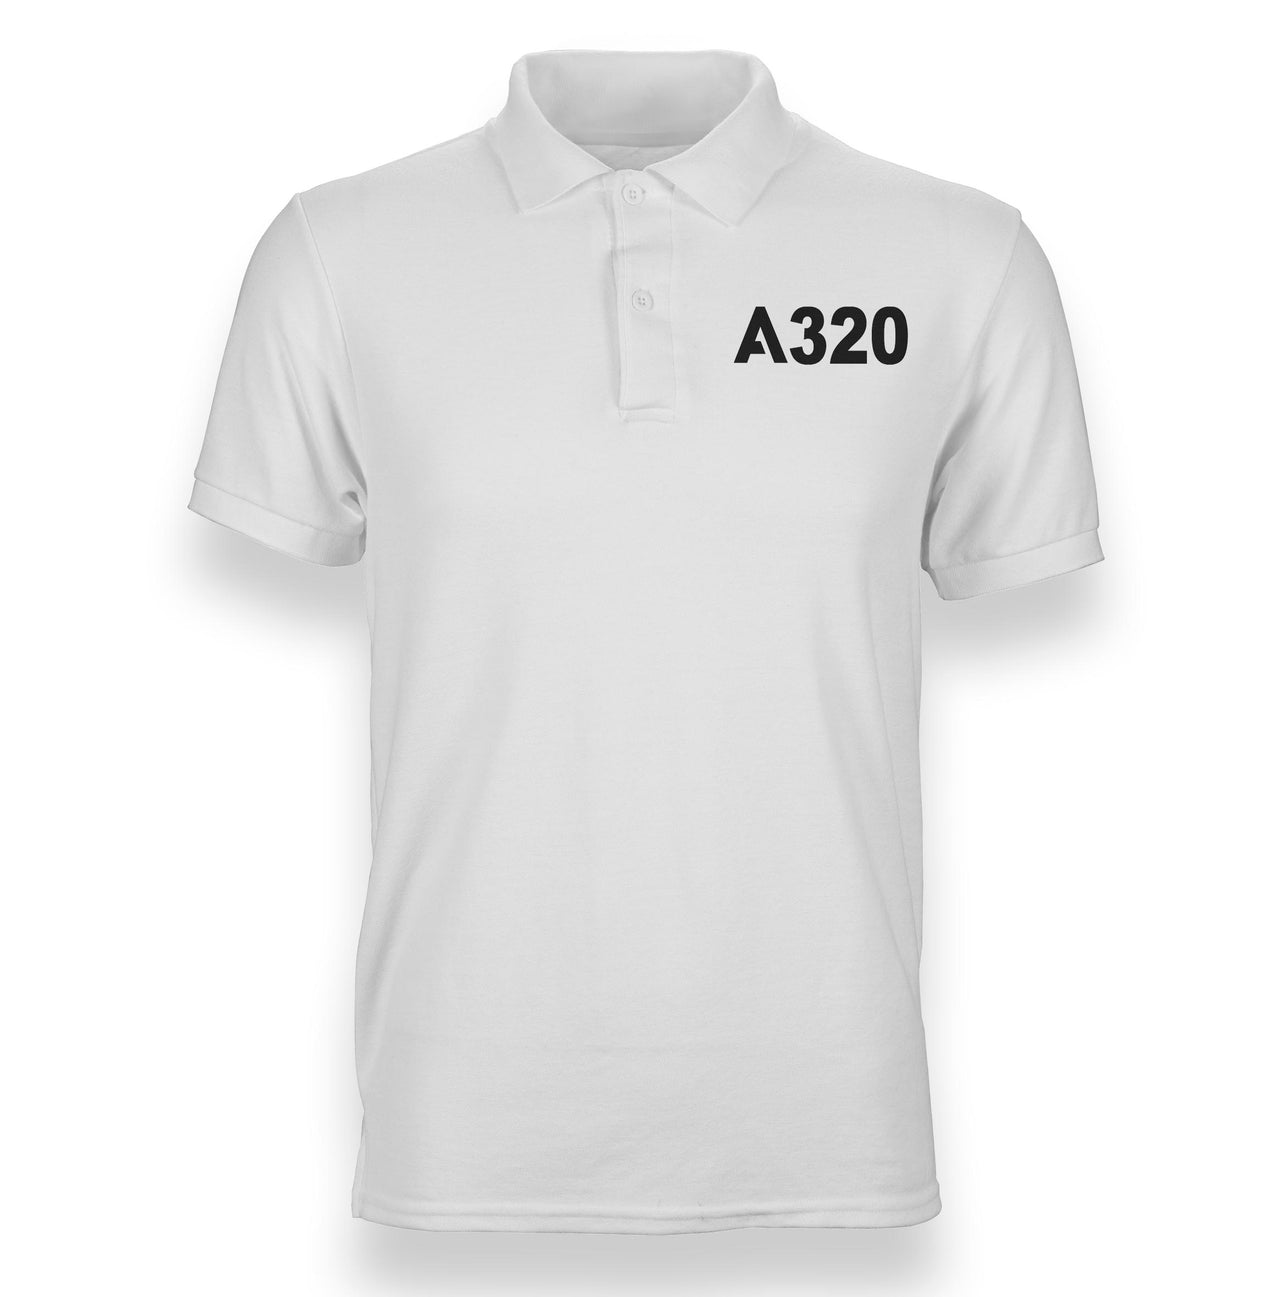 A320 Flat Text Designed Polo T-Shirts